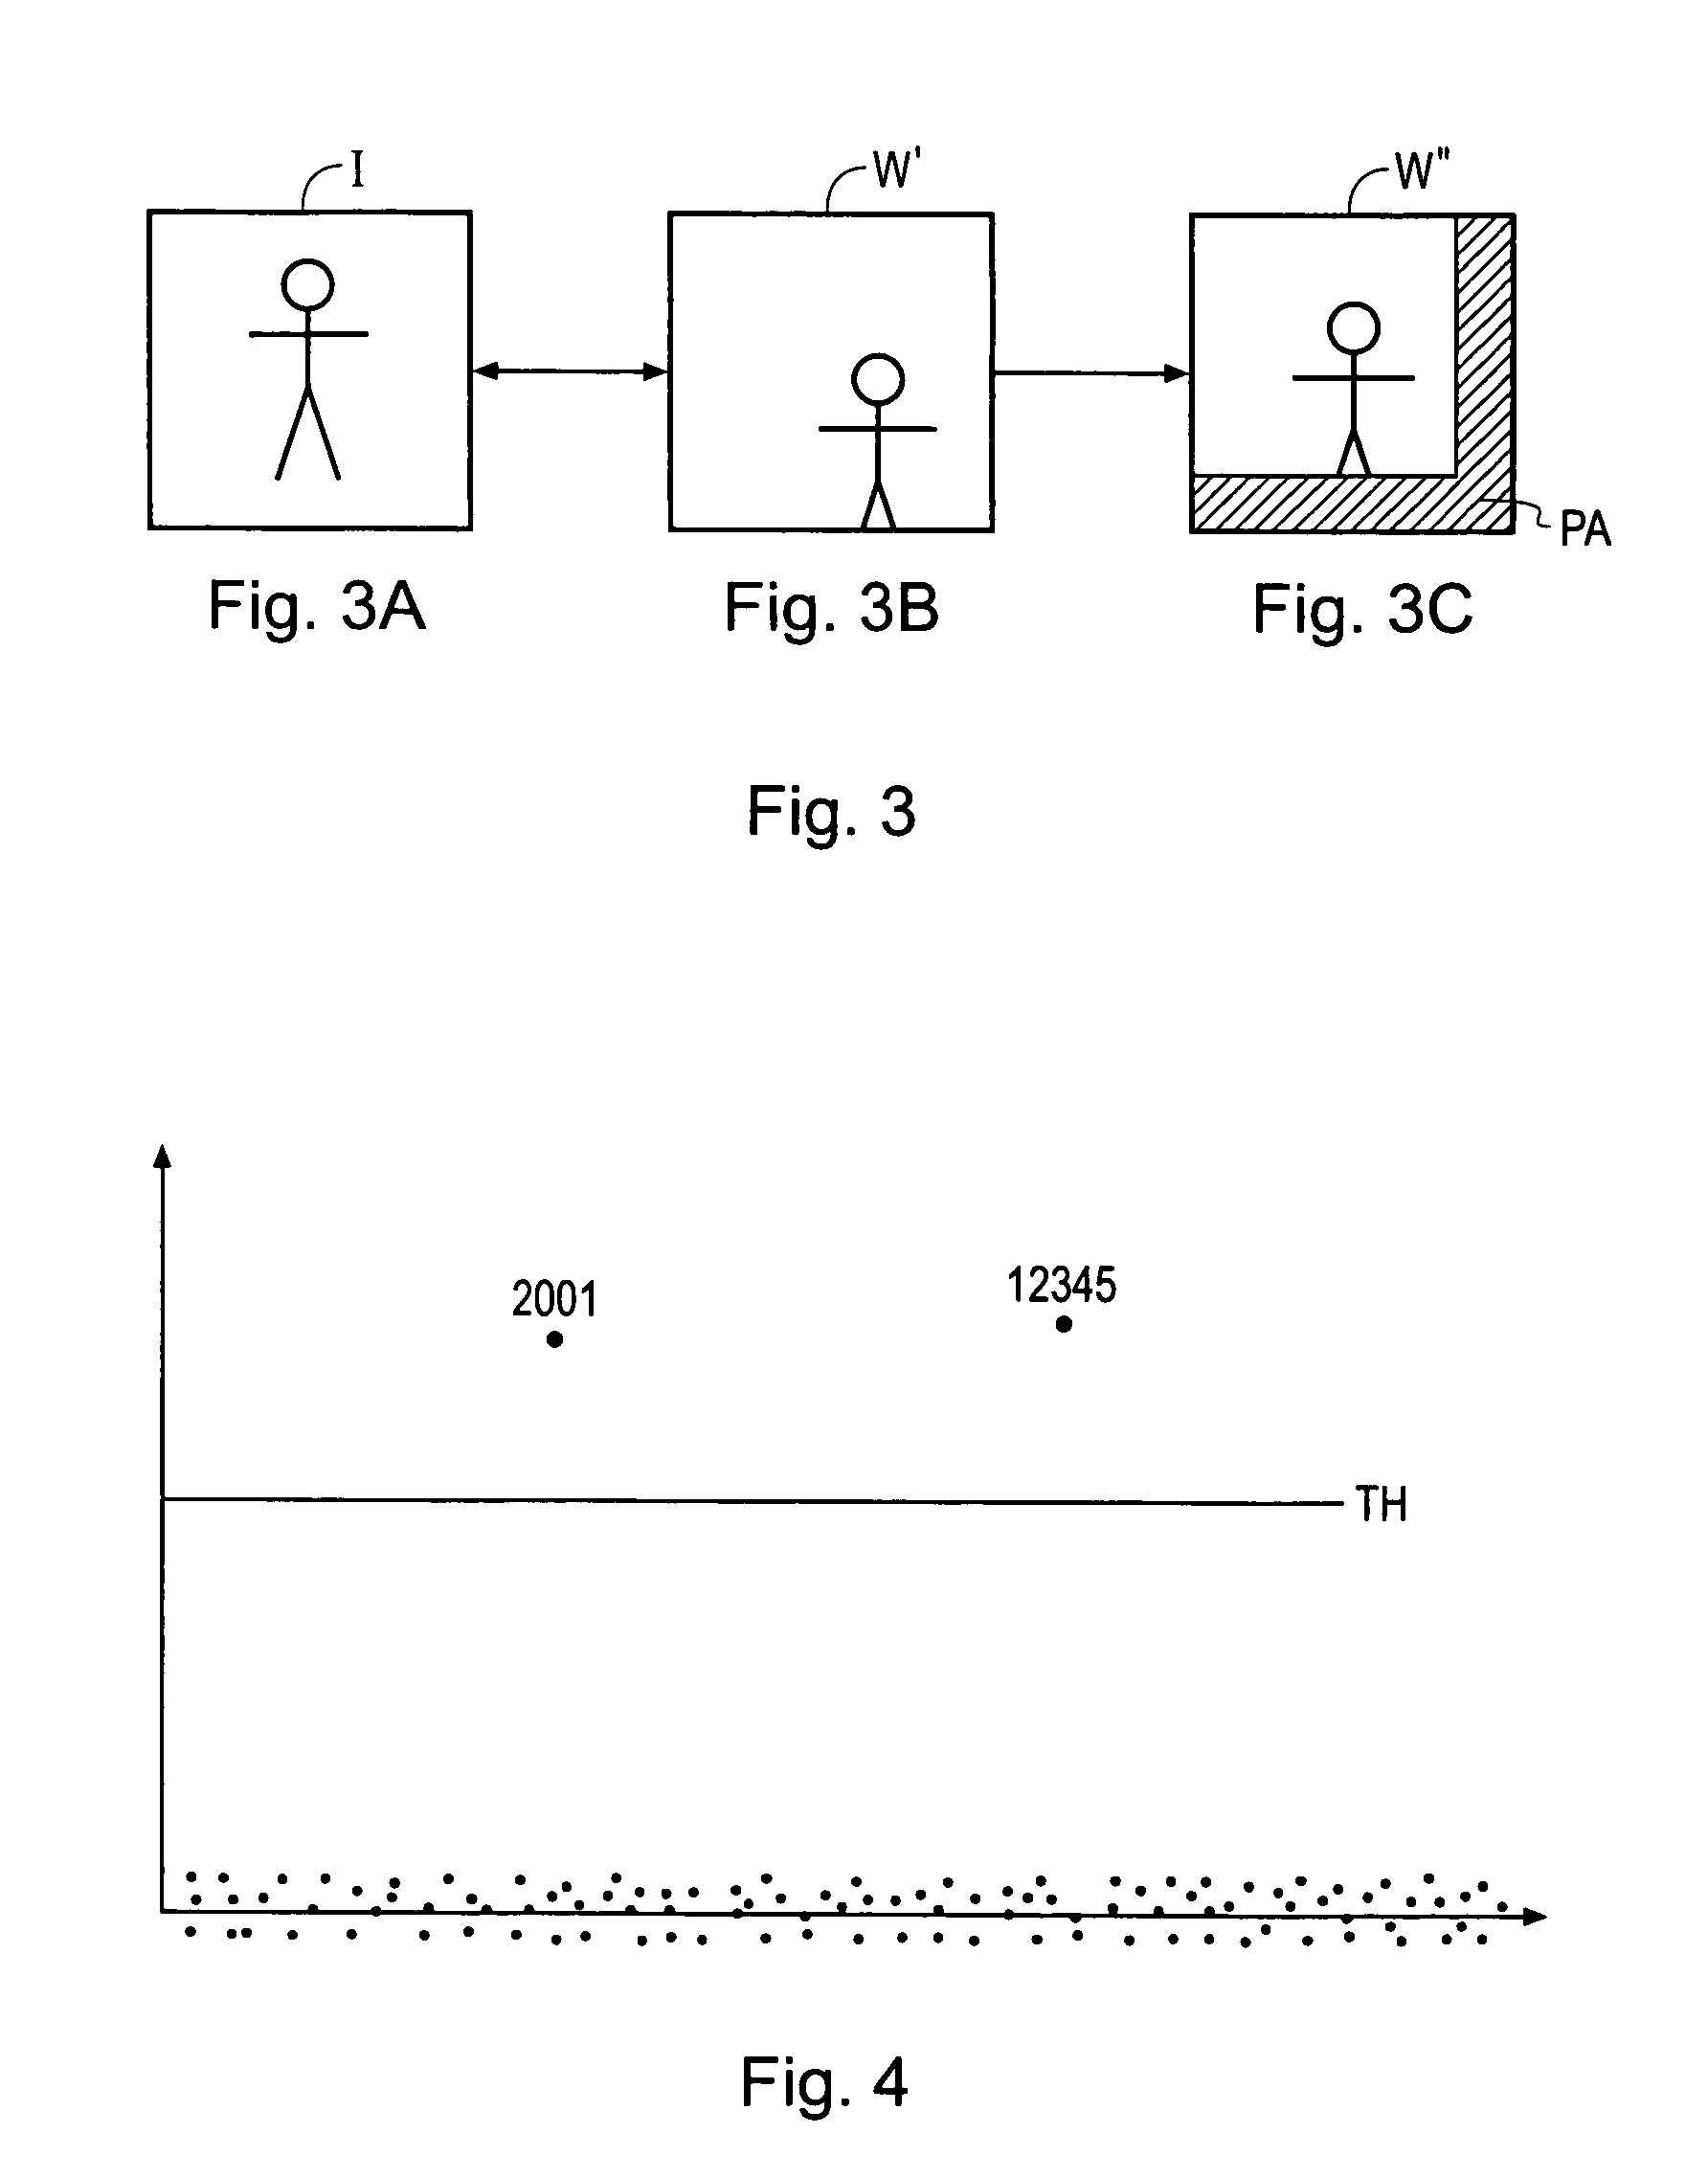 Apparatus and method for detecting embedded watermarks